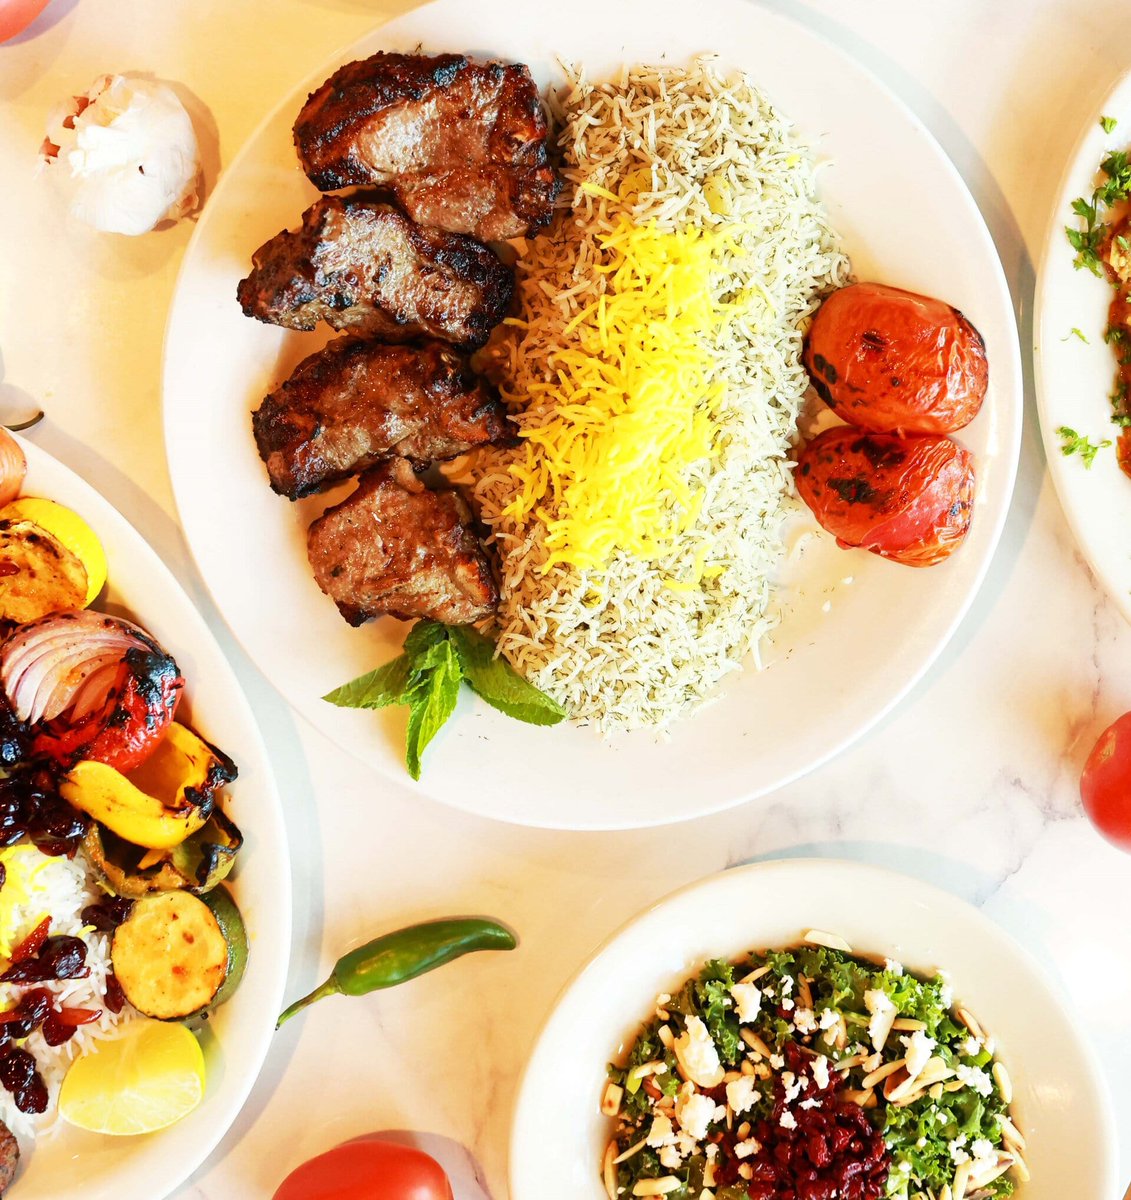 If you were to pick only one dish from Kasra to eat for the rest of your life, what would it be? 😋 Let us know in the comments below! 👇

Need a caterer? 👨‍🍳 Send us a message for a custom quote! 📩

#houstonrestaurants #houstontexas #houstonevents